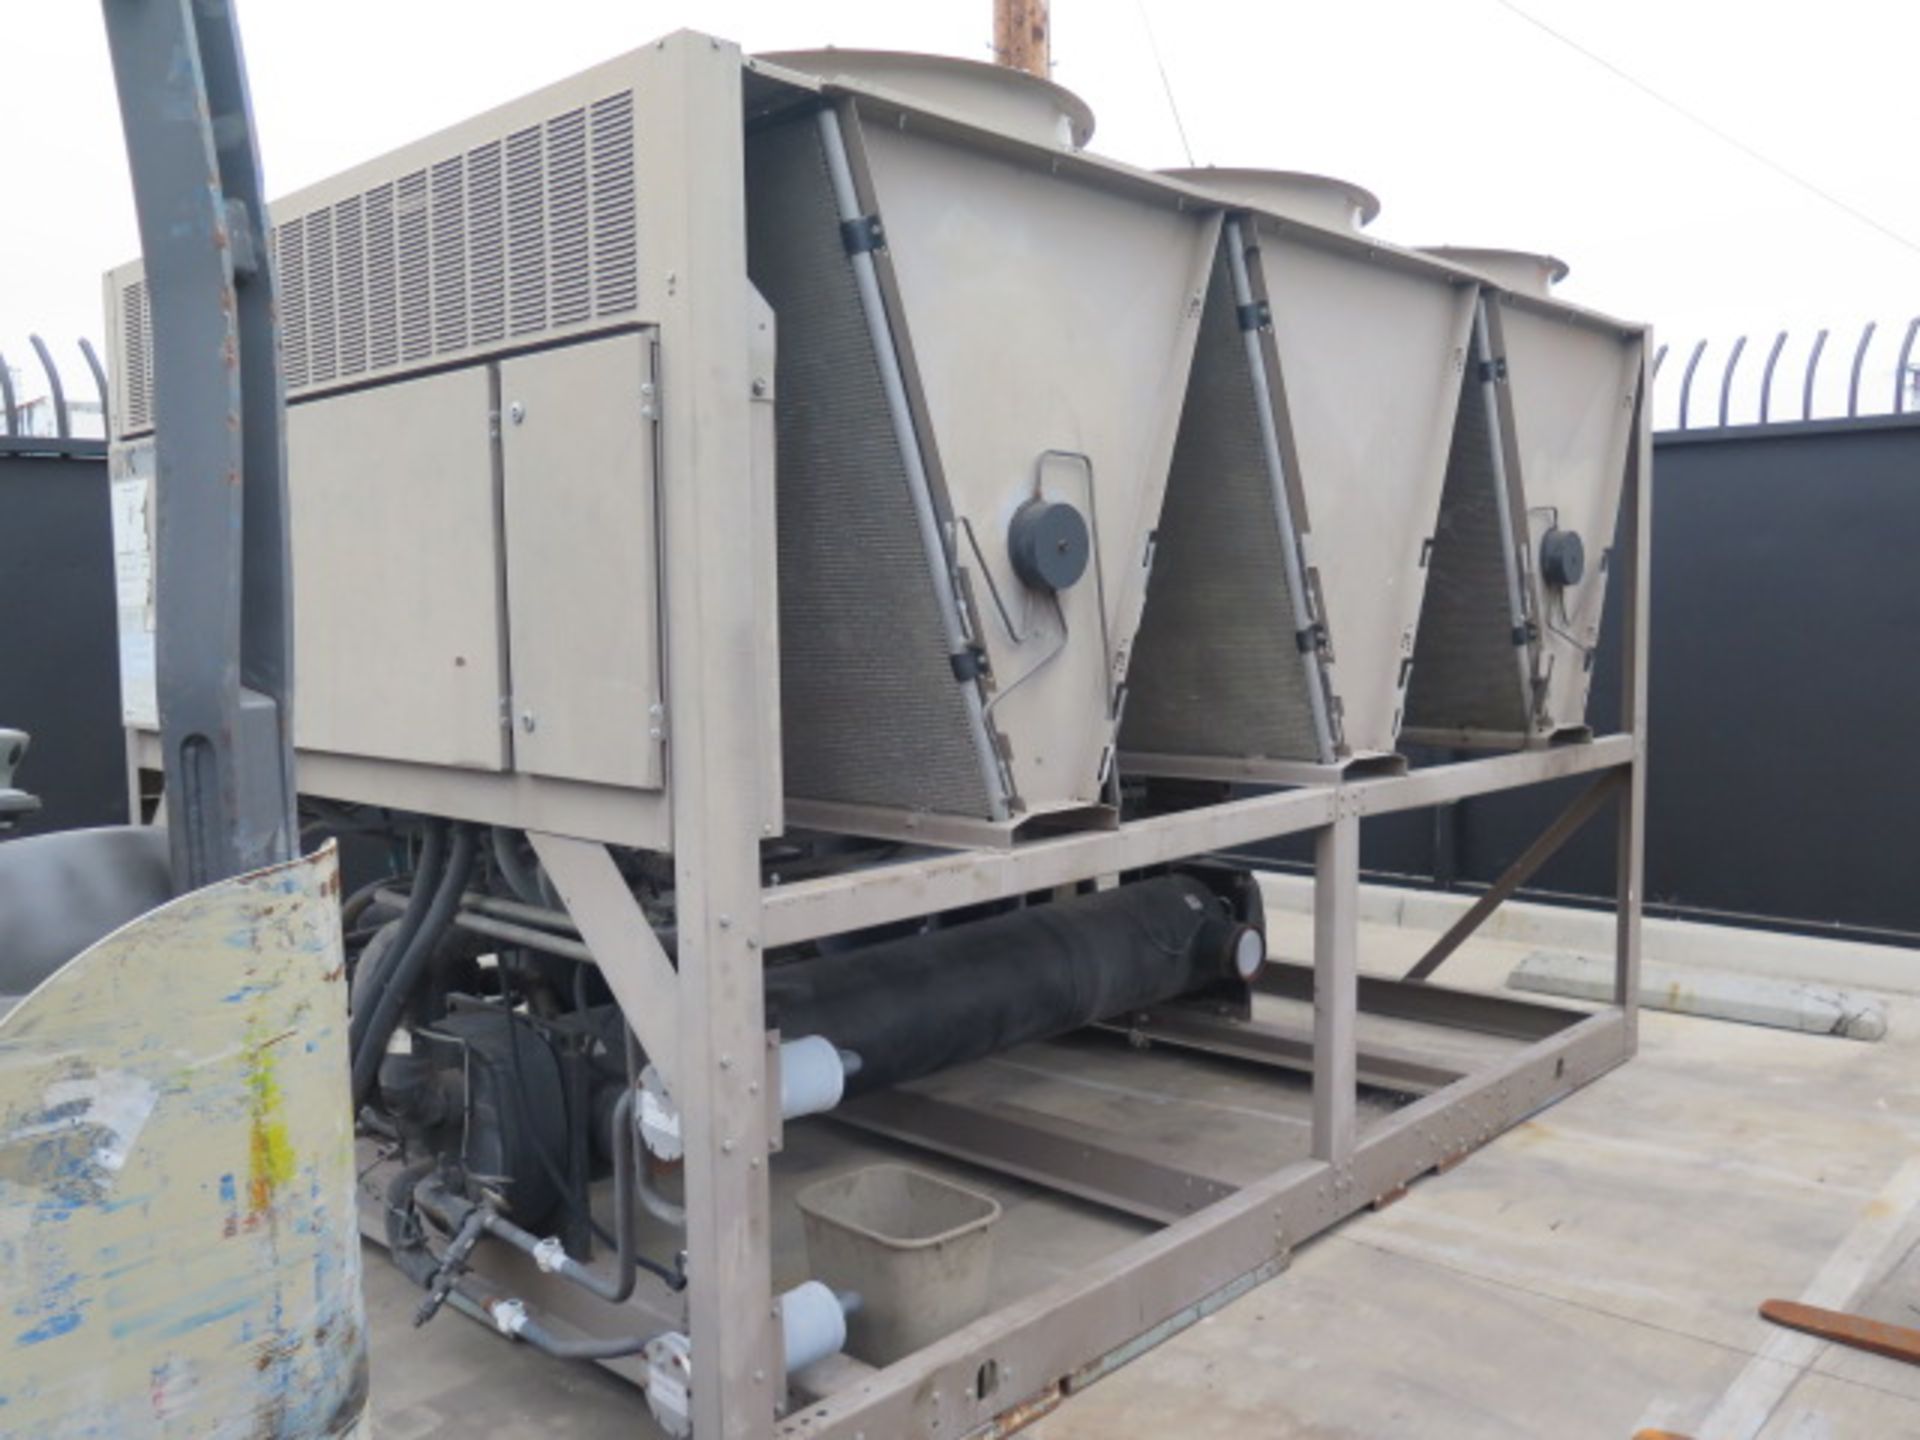 2008 York YLAA0101HE45XAAS Air Cooled Scroll Chiller, SOLD AS IS WITH NO WARRANTY - Image 2 of 11